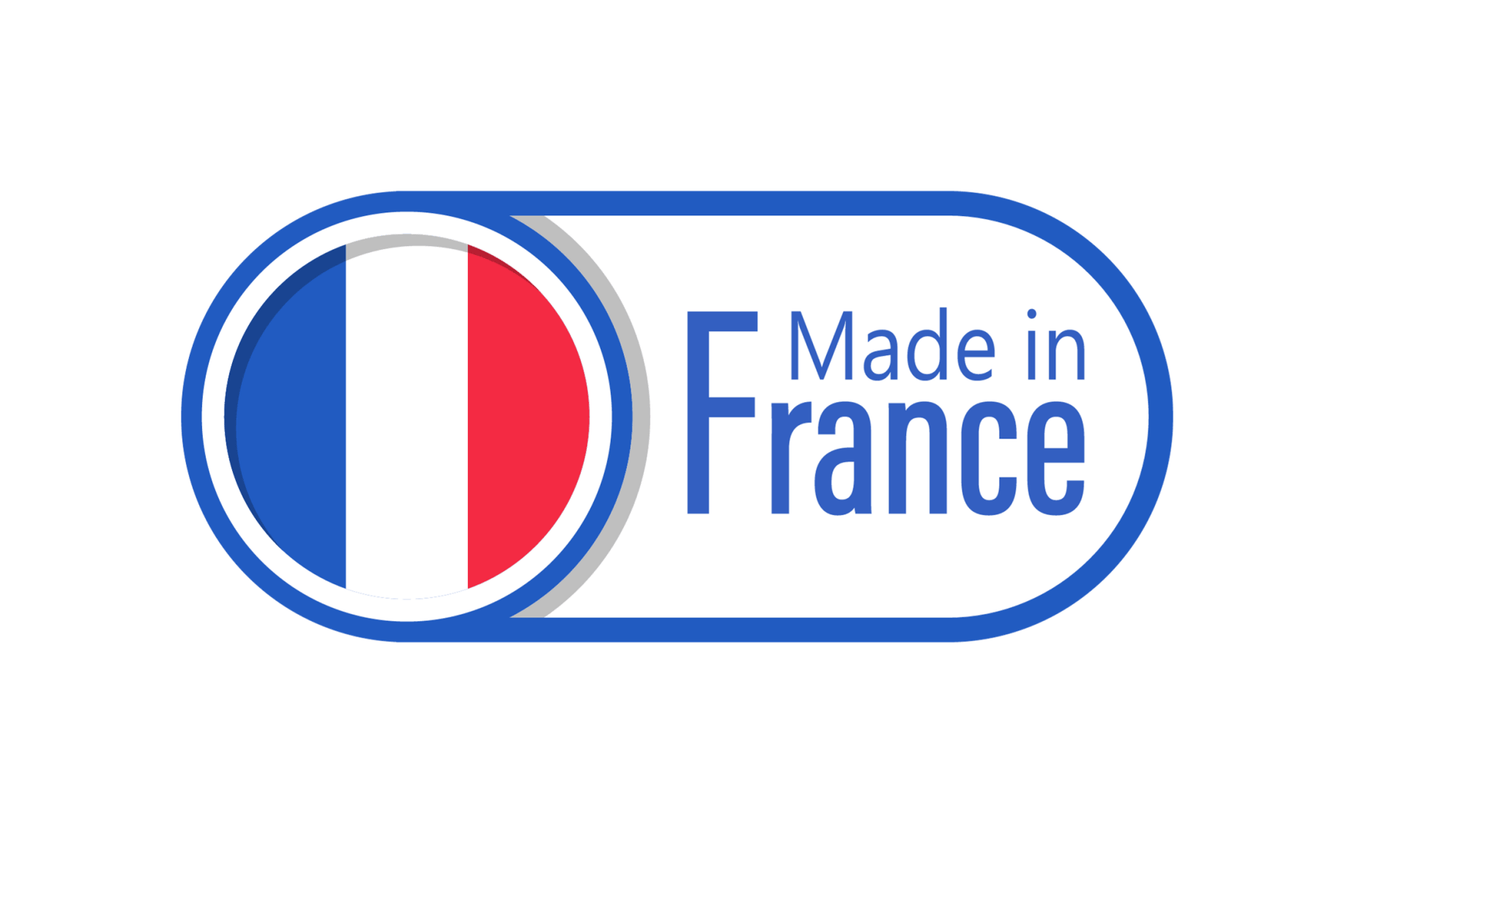 Made in France - Le Traileur Anonyme